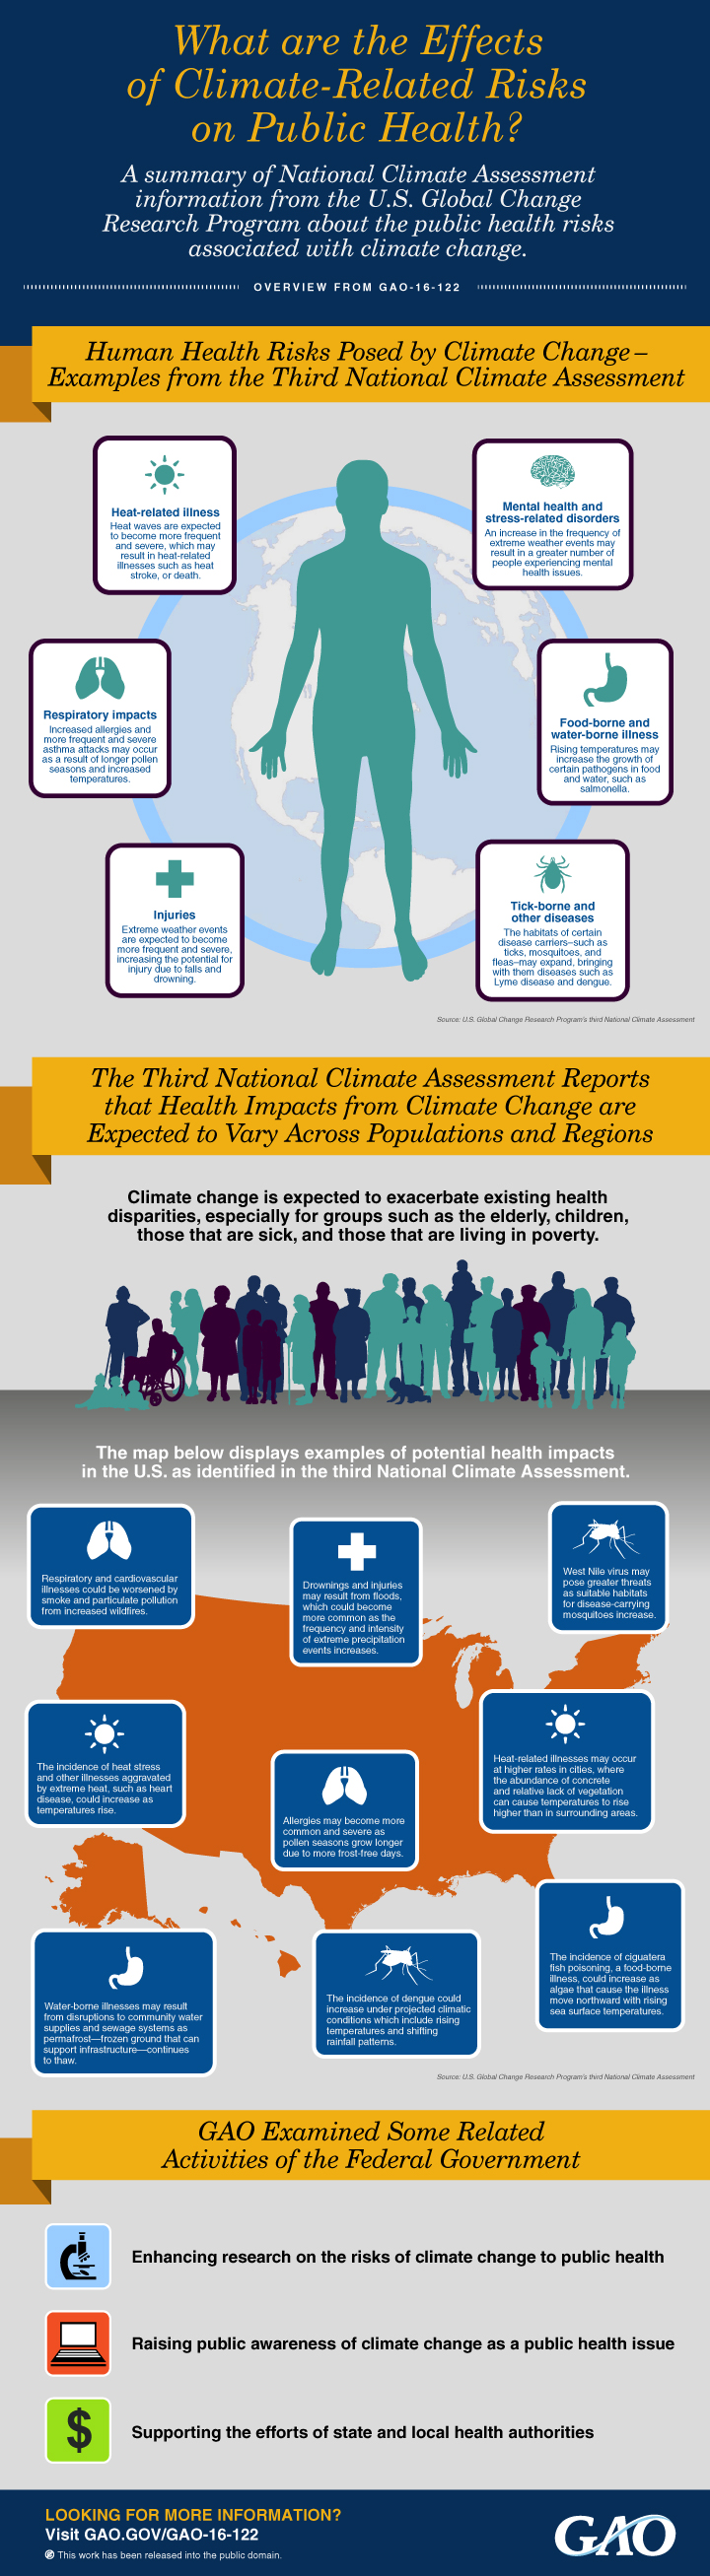 GAO-16-122: Climate Change Infographic